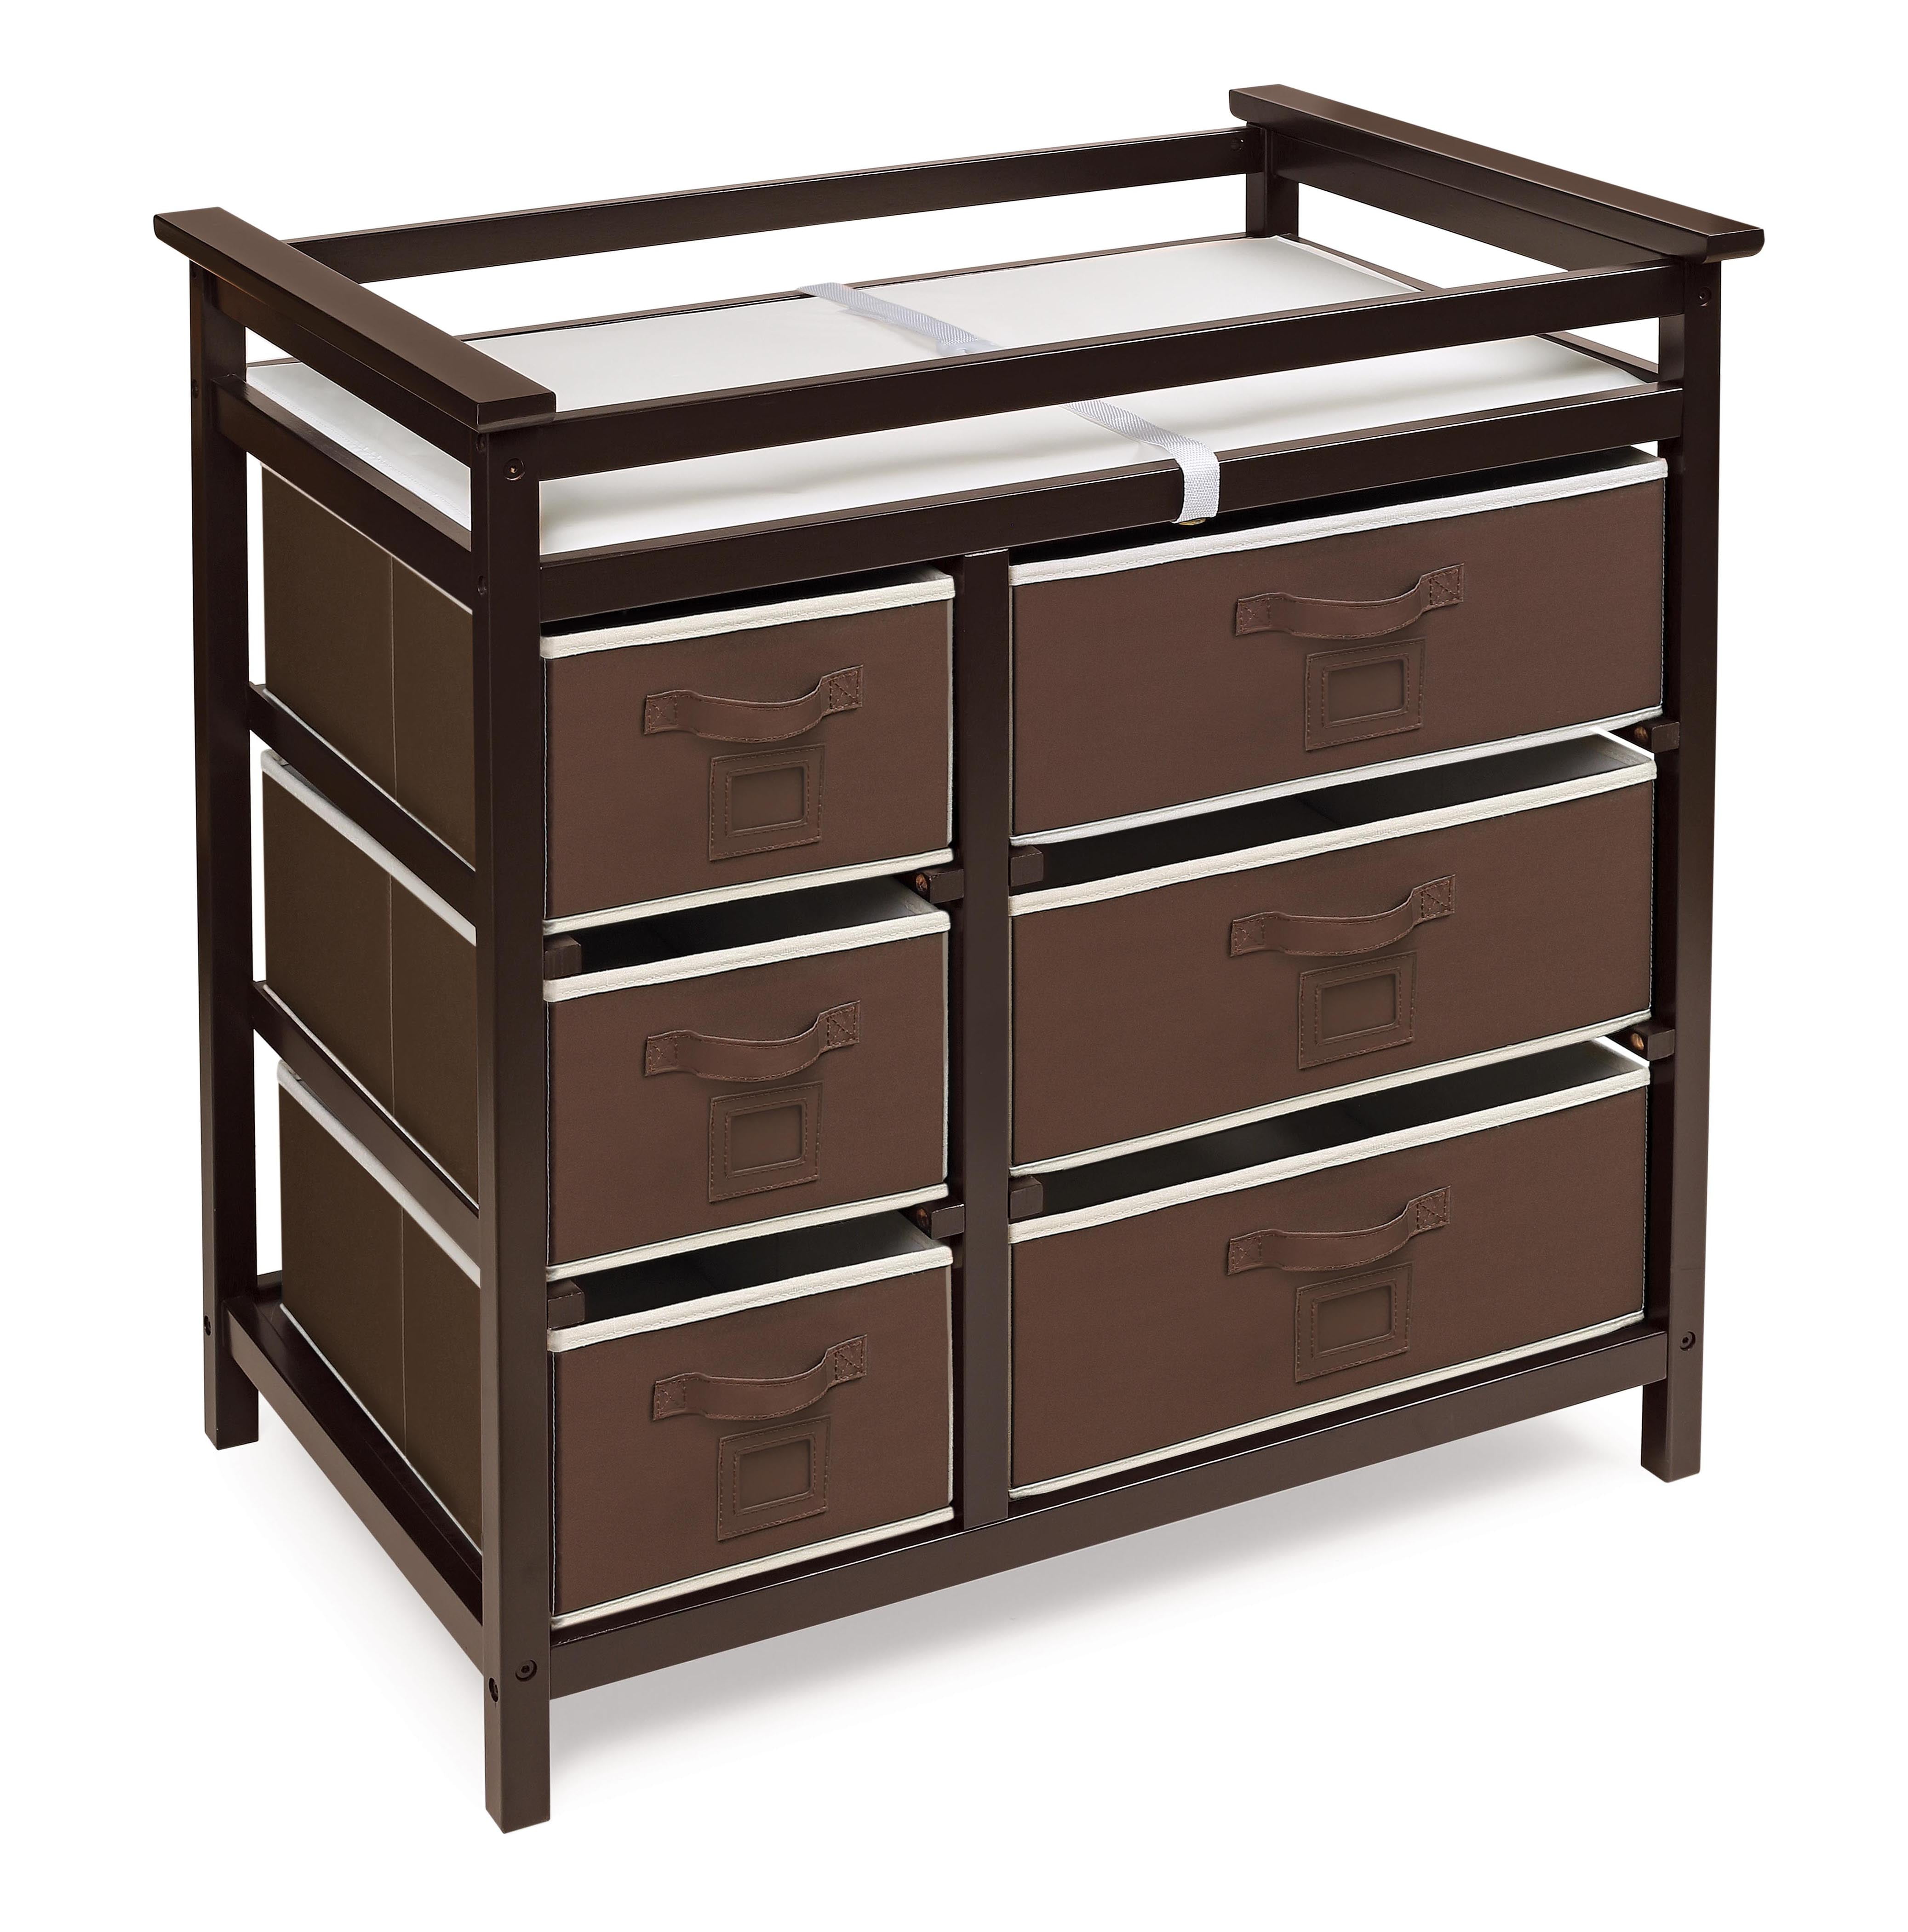 Badger Basket Modern Baby Changing Table with Six Baskets, Espresso